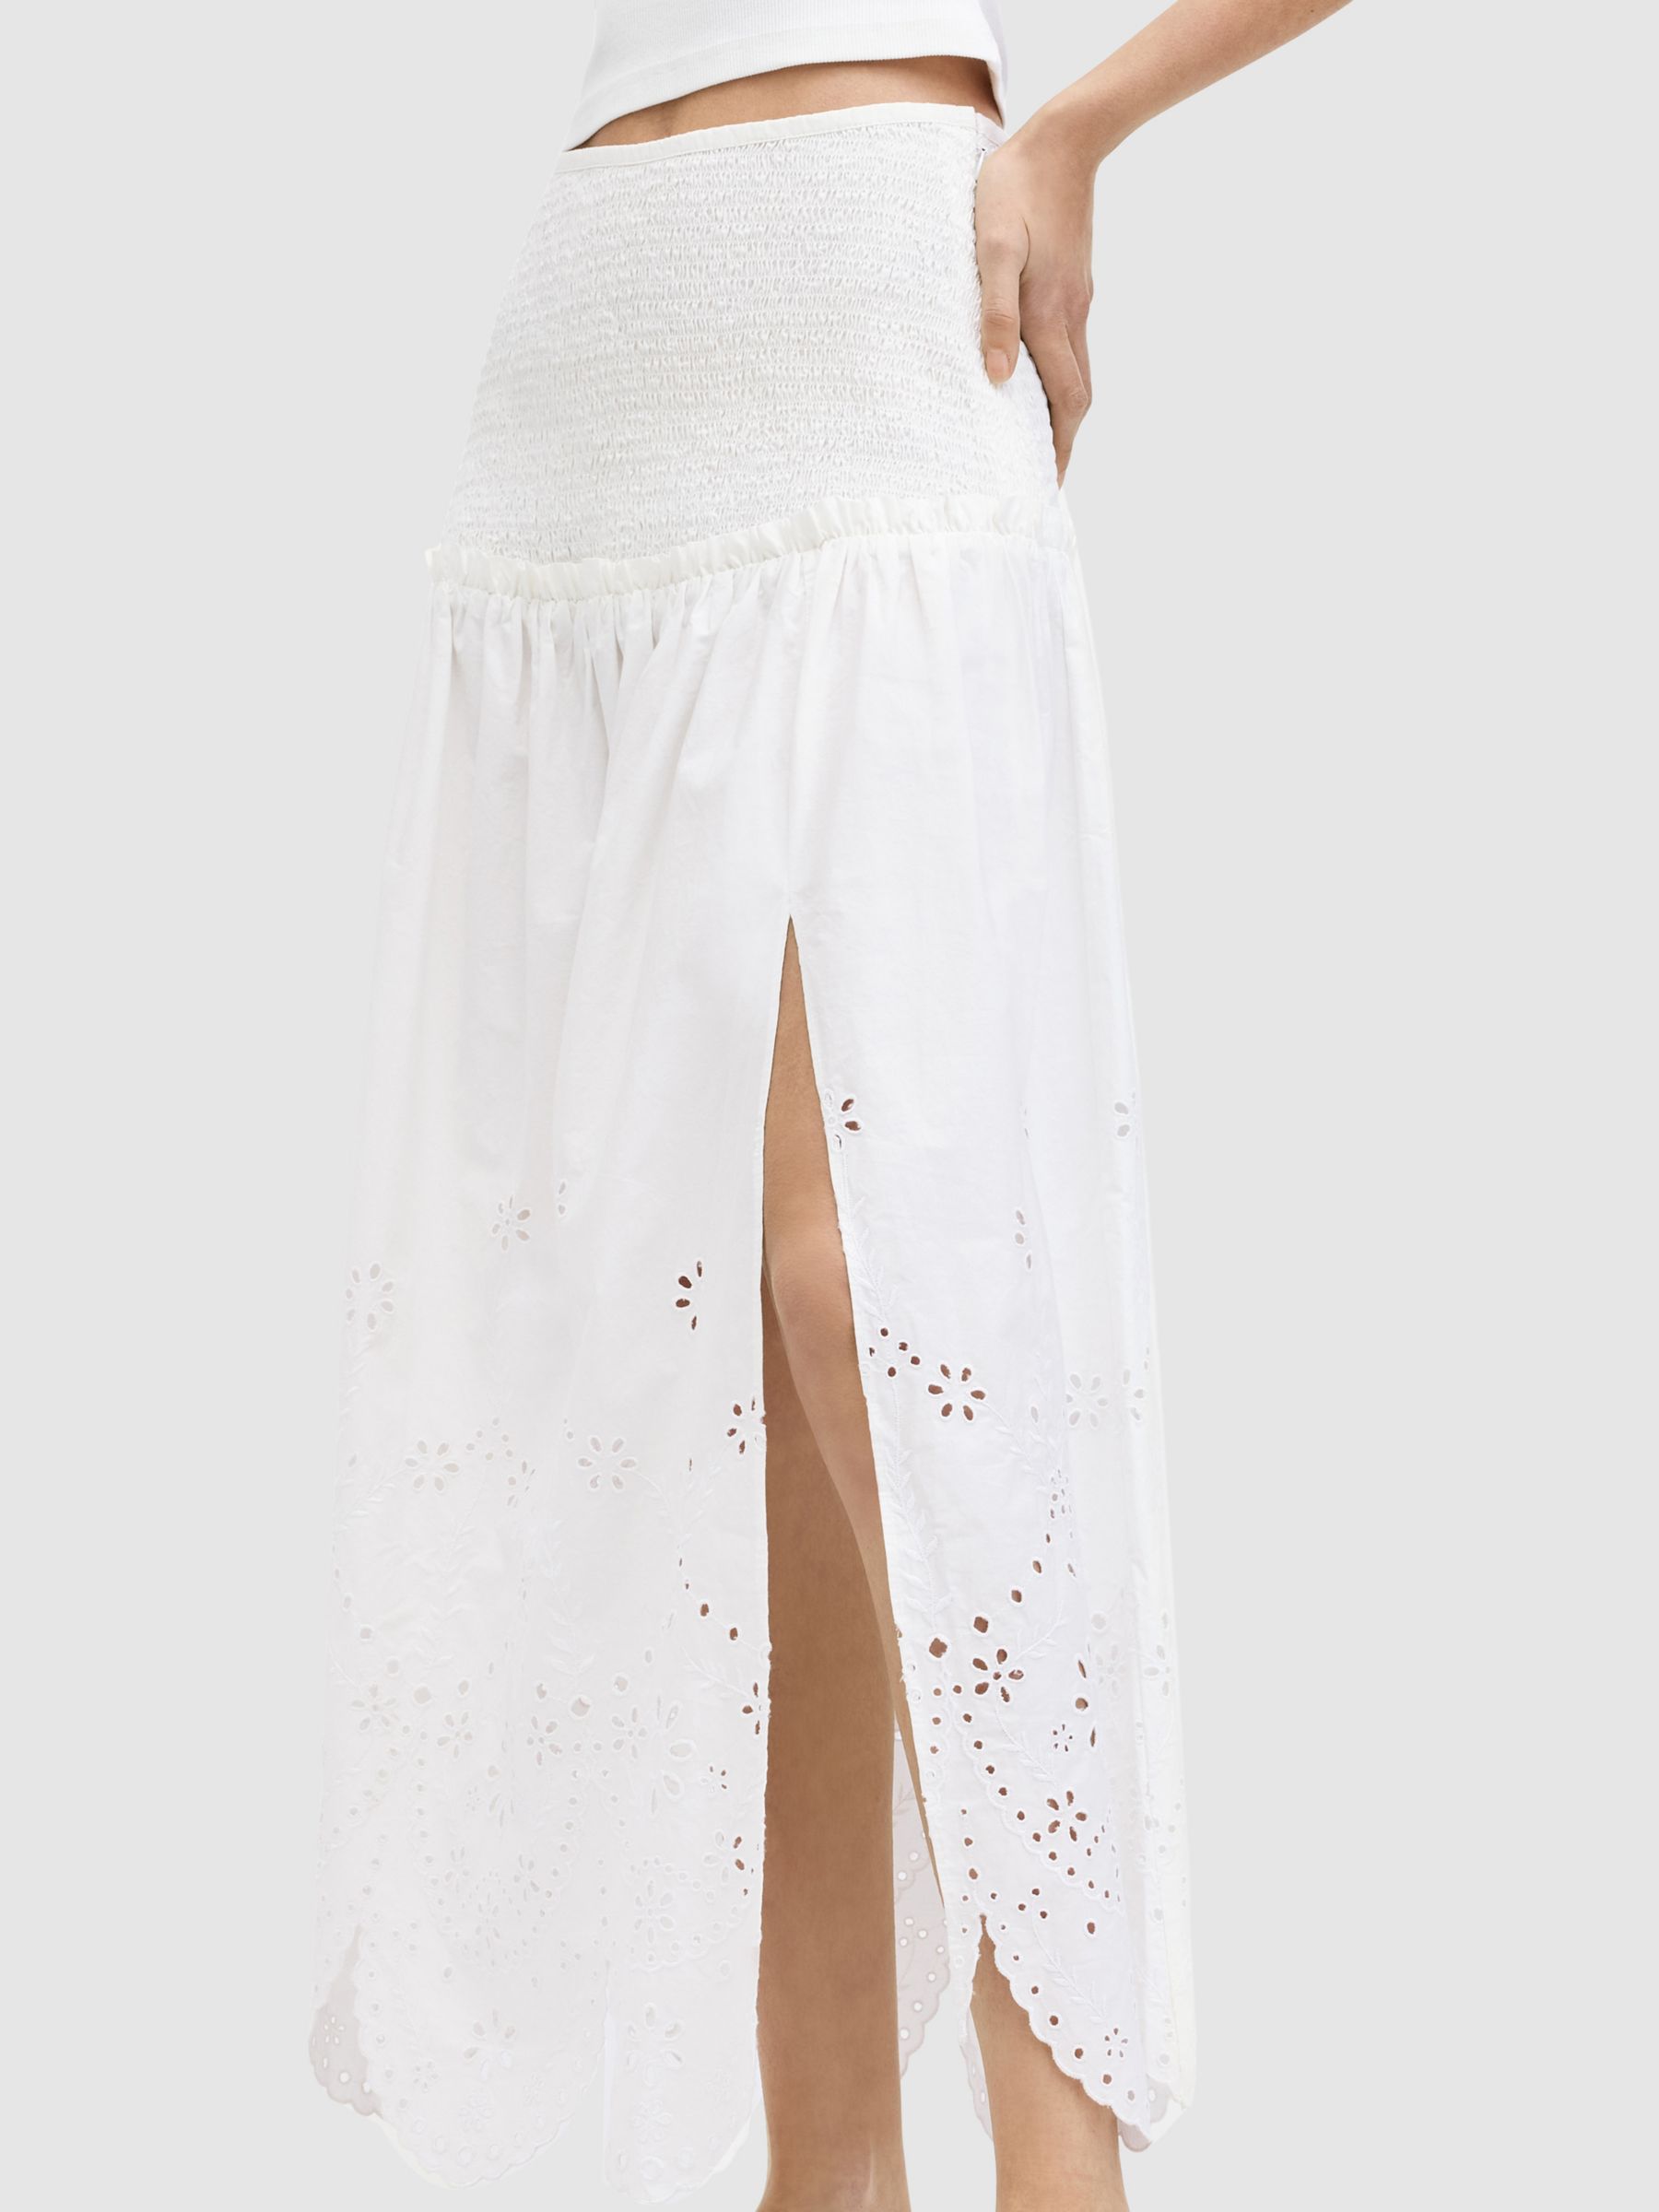 Buy AllSaints Alex Broderie Anglaise Maxi Skirt, Off White Online at johnlewis.com